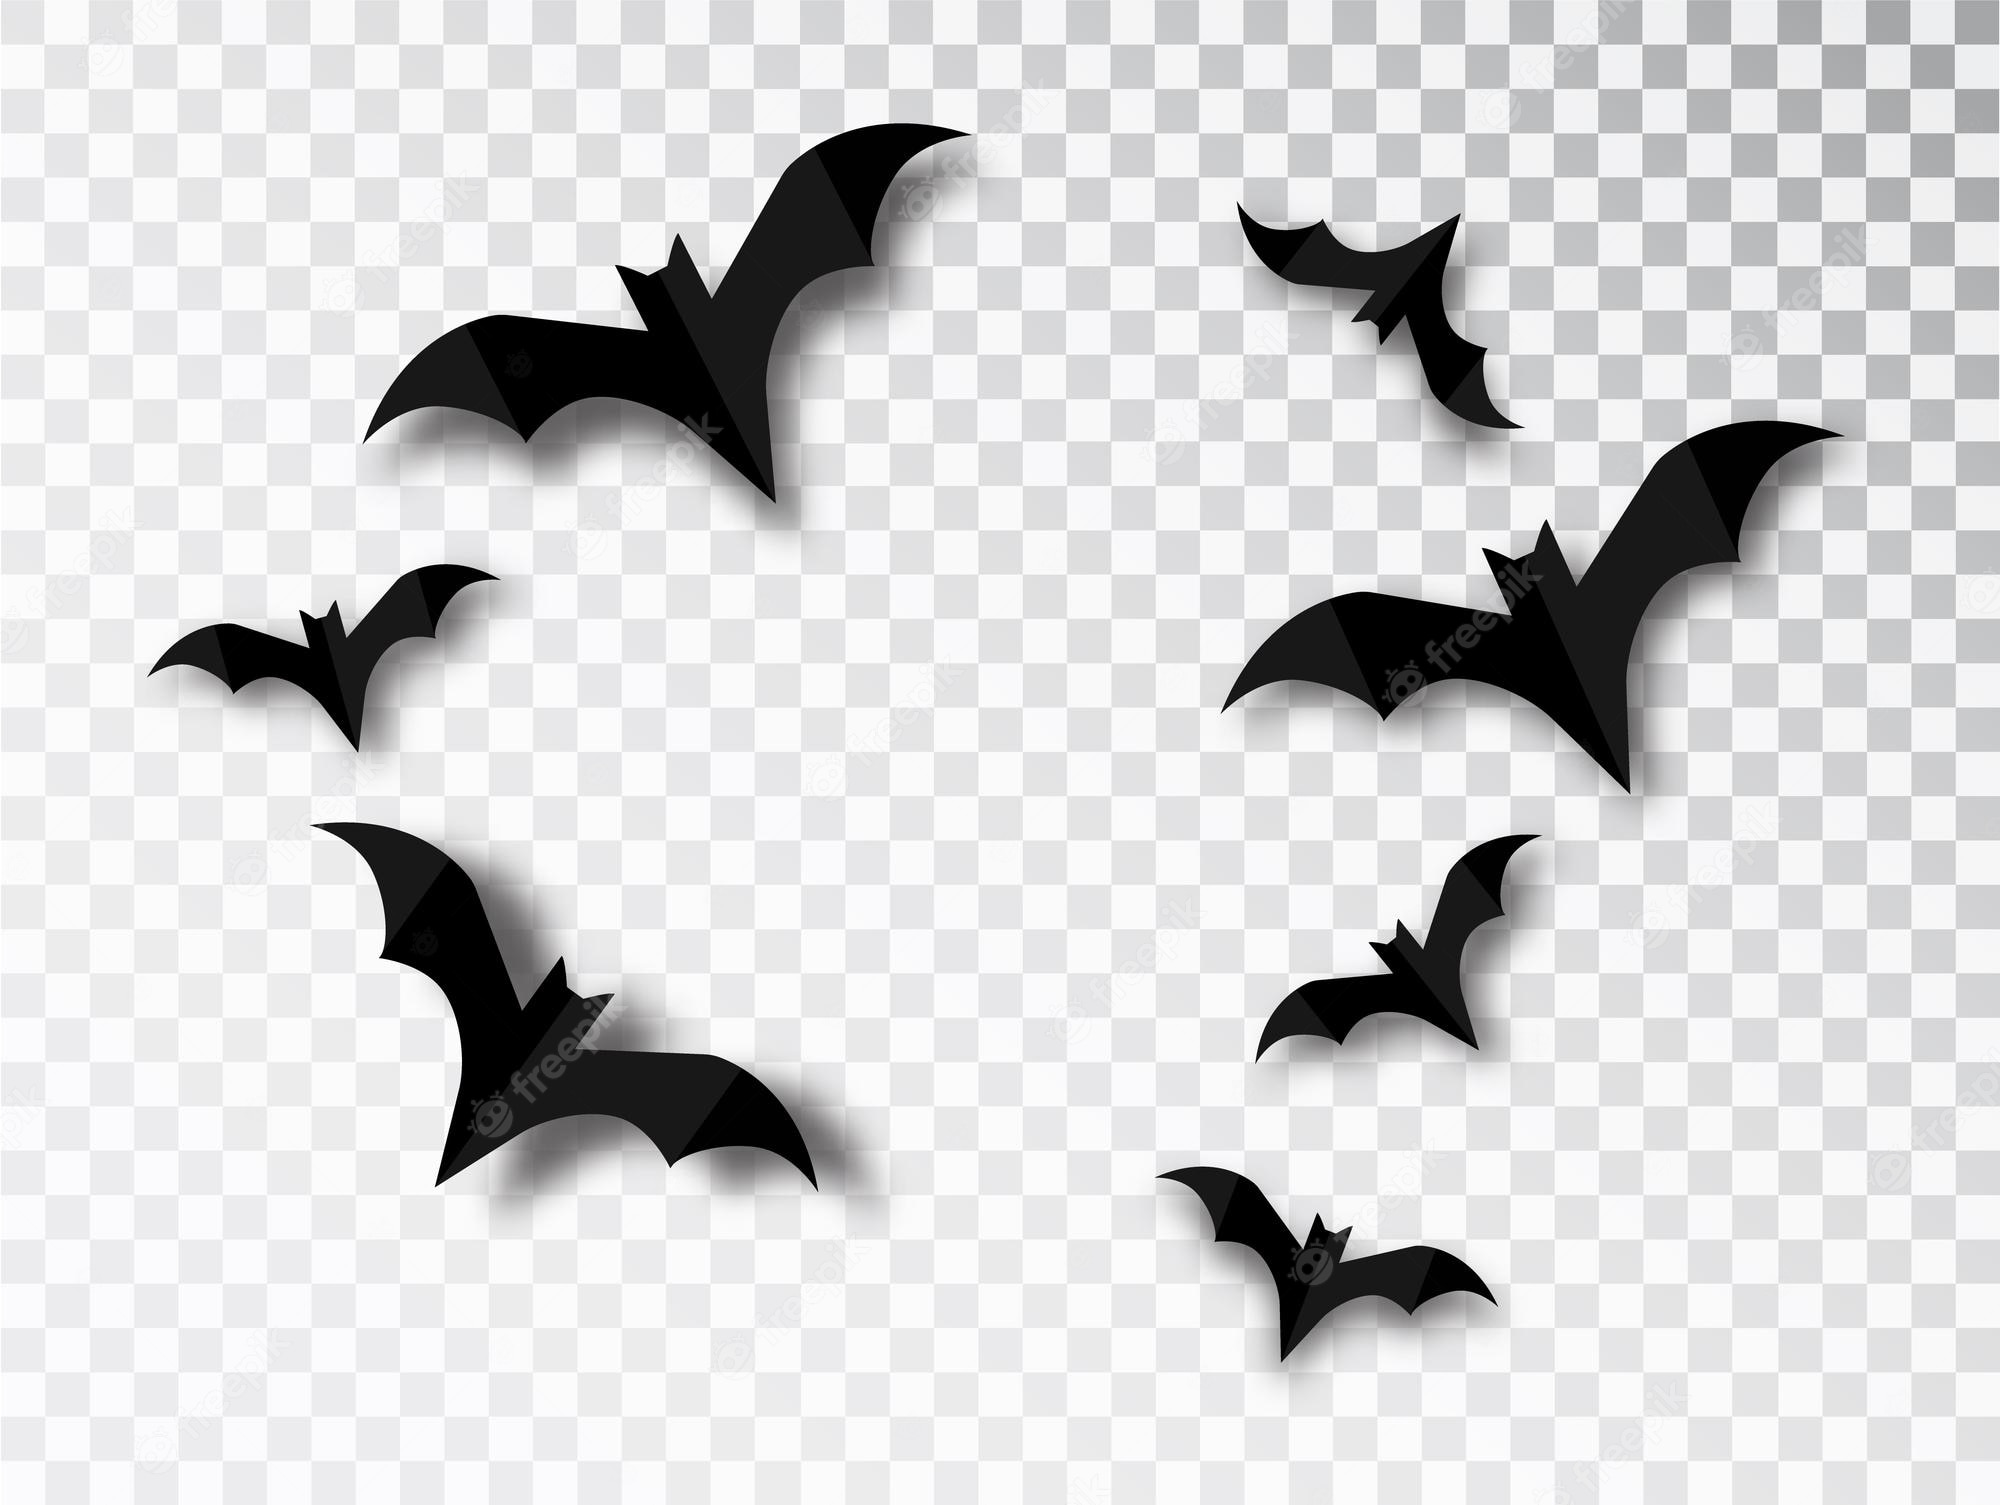 5. "Halloween Nail Design with Bat Silhouettes" - wide 6